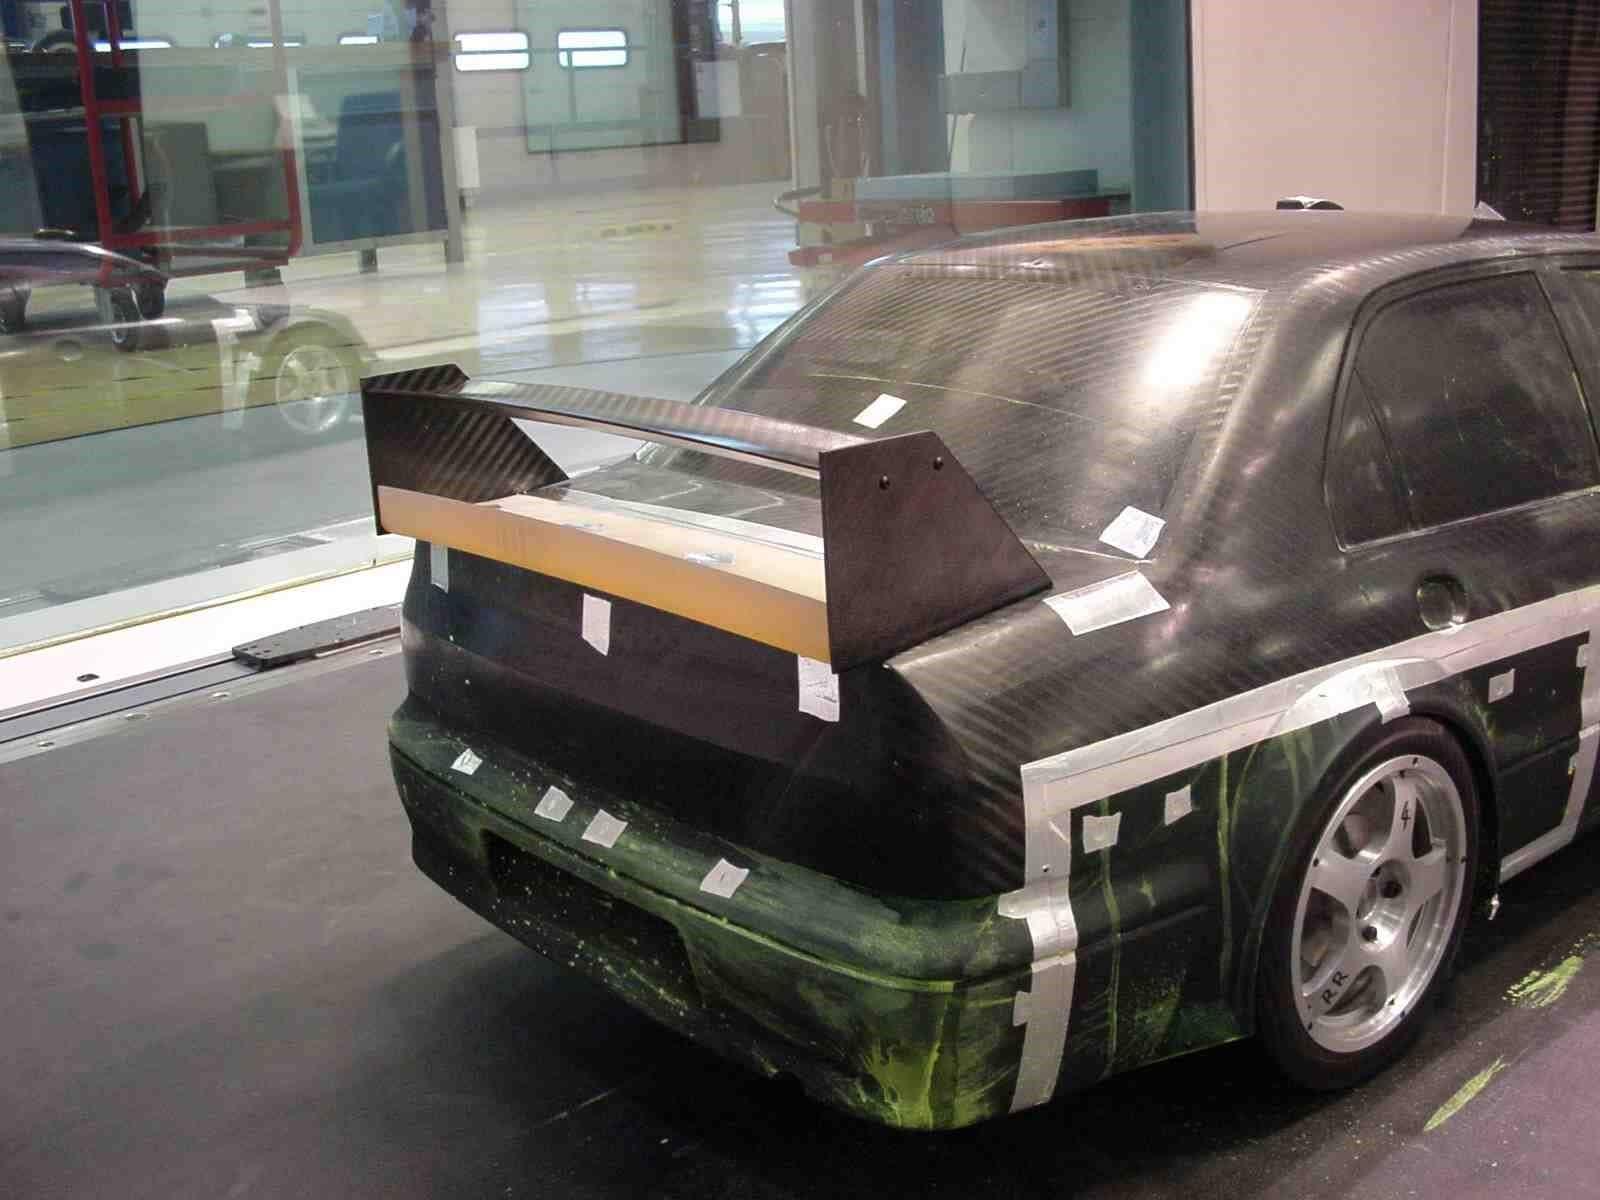 Mitsubishi Lancer WRC04 test model, Lola wind tunnel, 2003 - evaluation of a classic rear wing